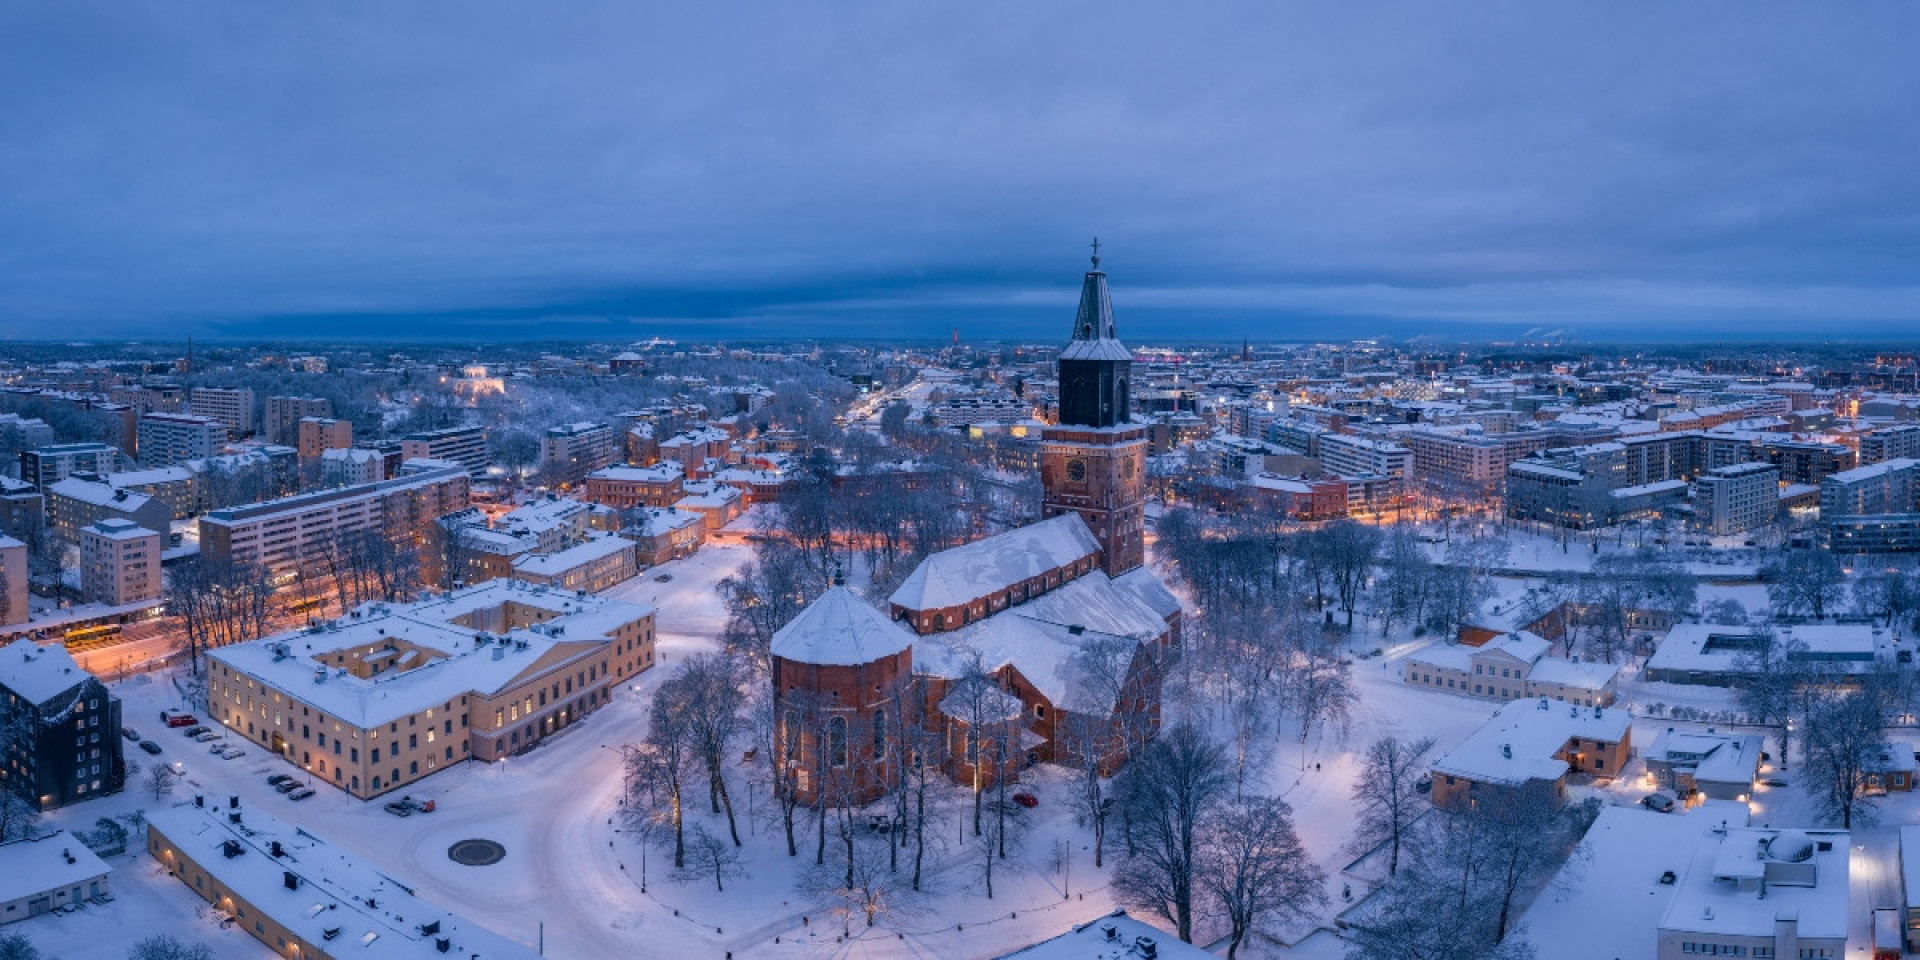 <p>In 2019, Finland's life expectancy averaged 81 years. As of 2023, the country's life expectancy rate has increased to 82 years and will likely continue in that trajectory as medical technology advances.</p><p>You may also like:<a href="https://www.starsinsider.com/n/278242?utm_source=msn.com&utm_medium=display&utm_campaign=referral_description&utm_content=582401en-en"> The most bizarre lawsuits ever filed against celebrities</a></p>